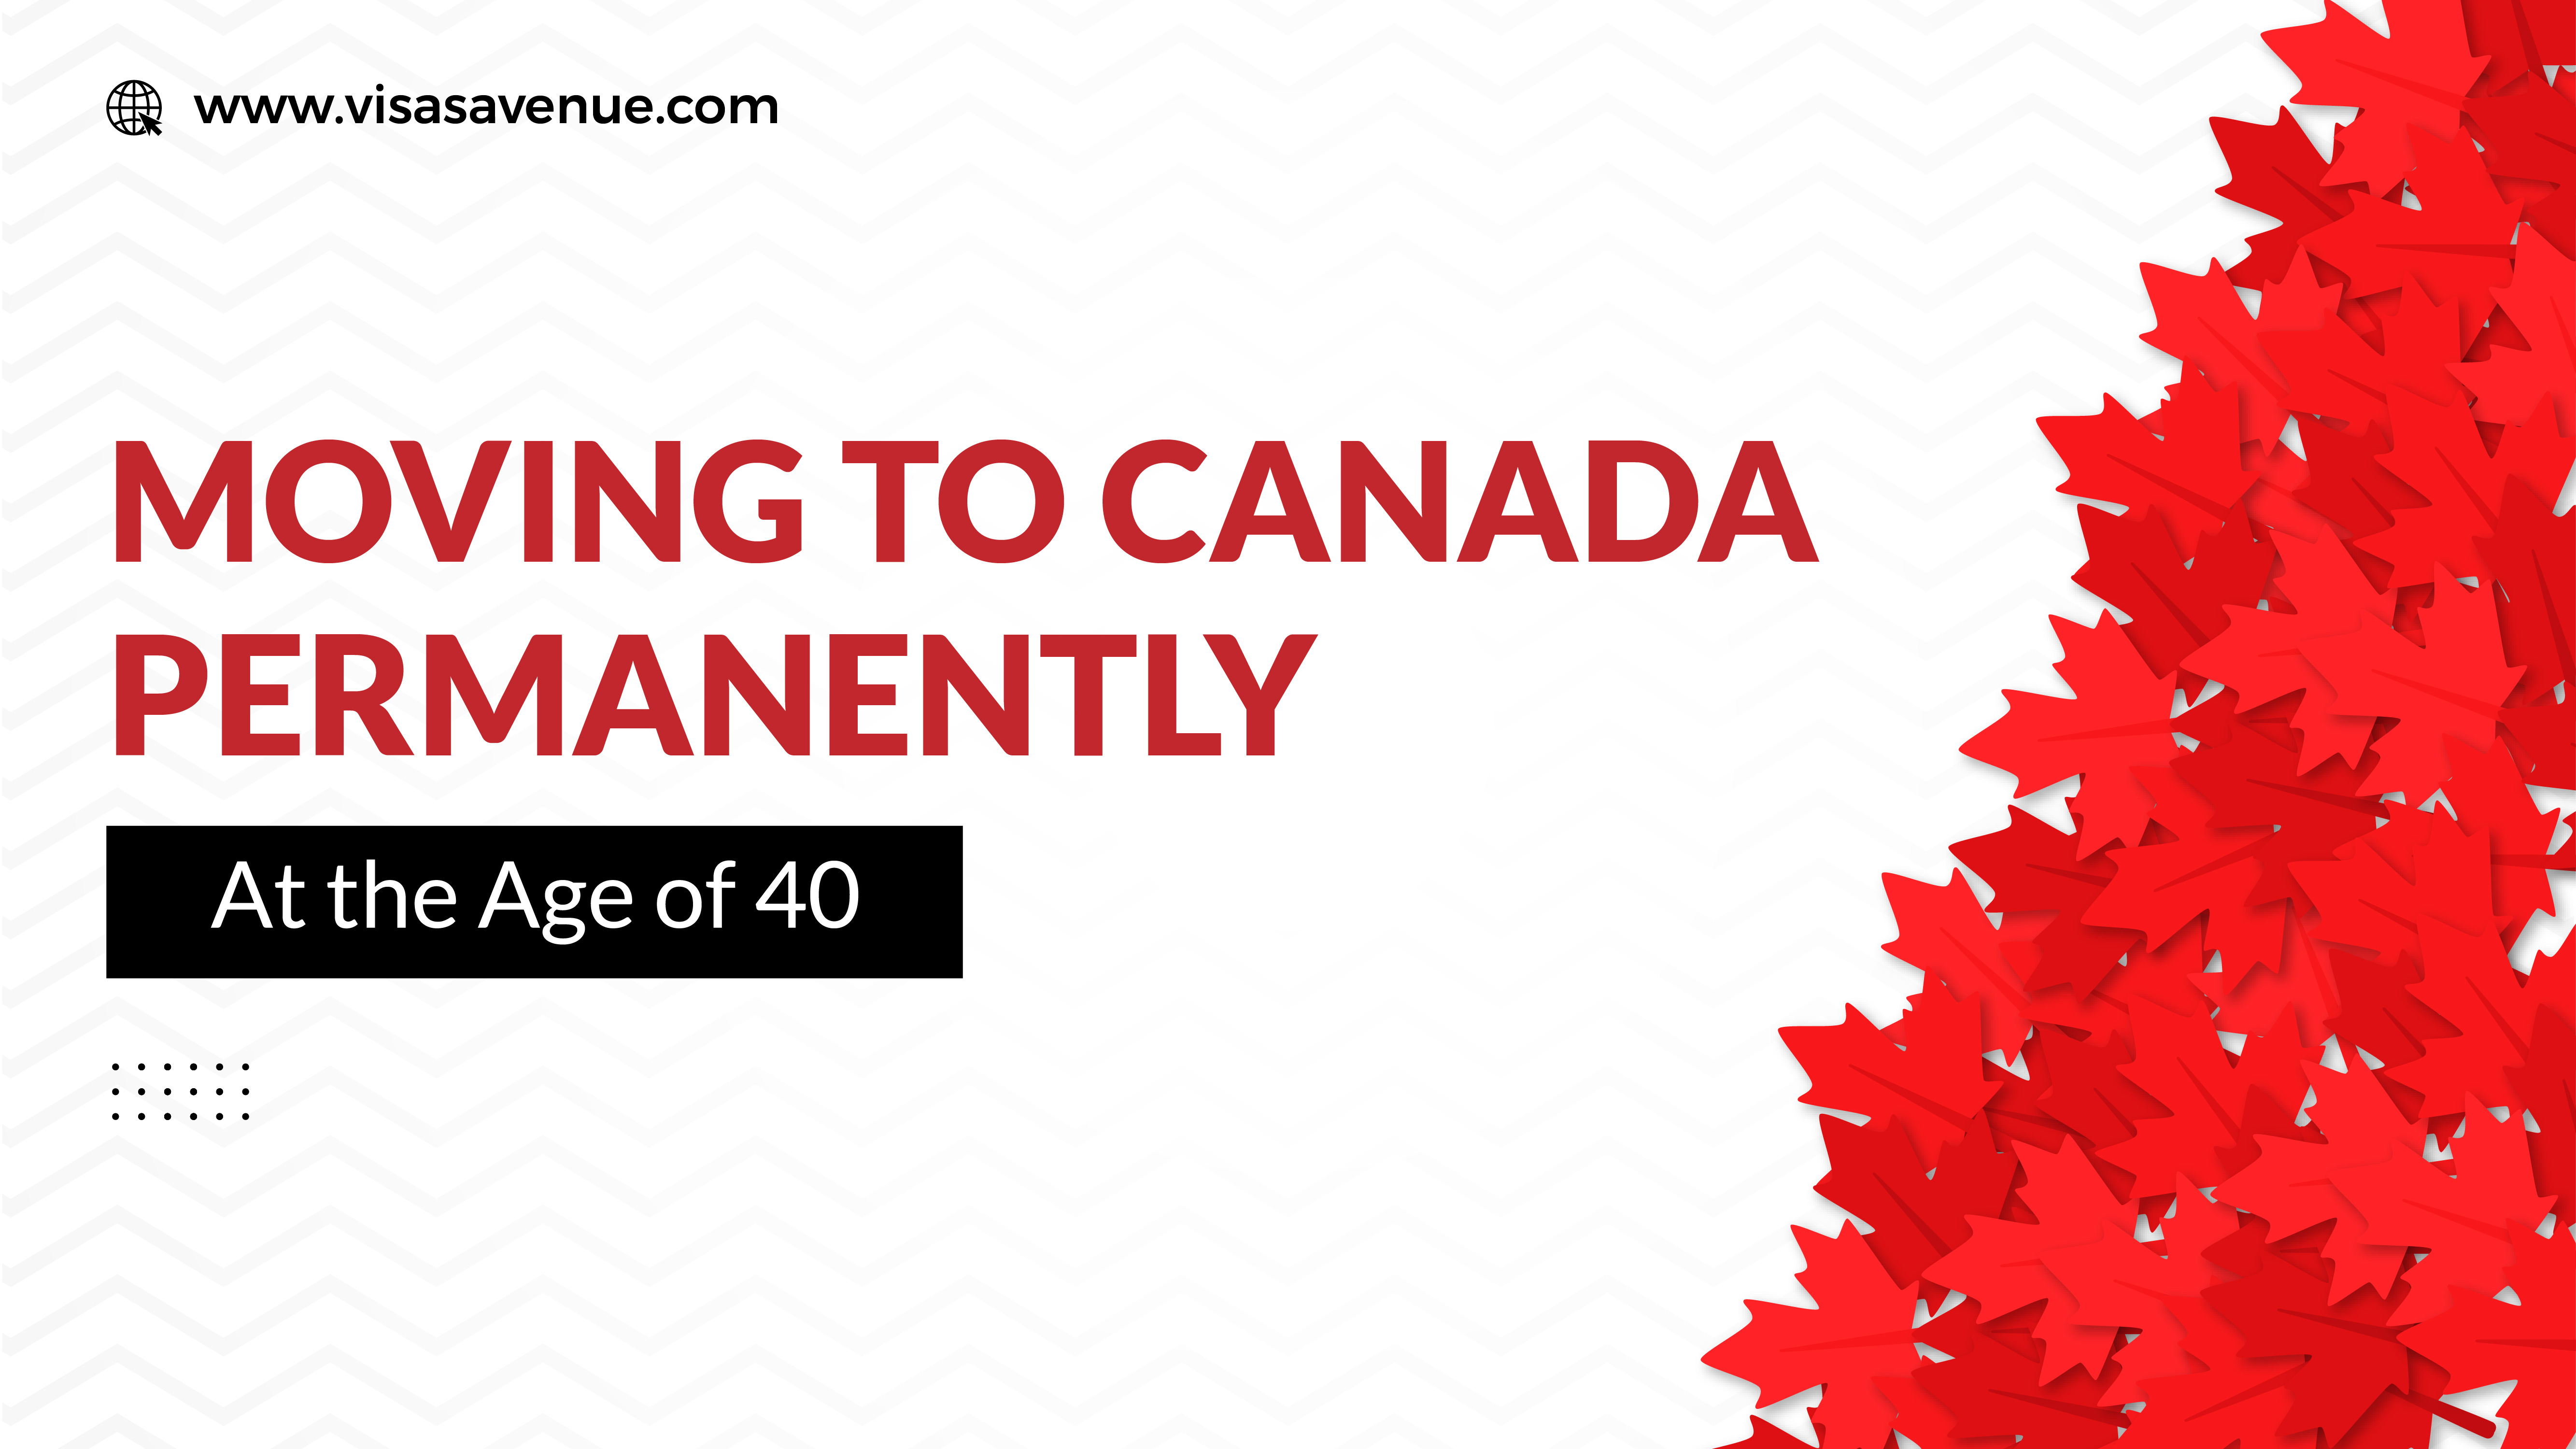 Moving to Canada Permanently at the Age of 40